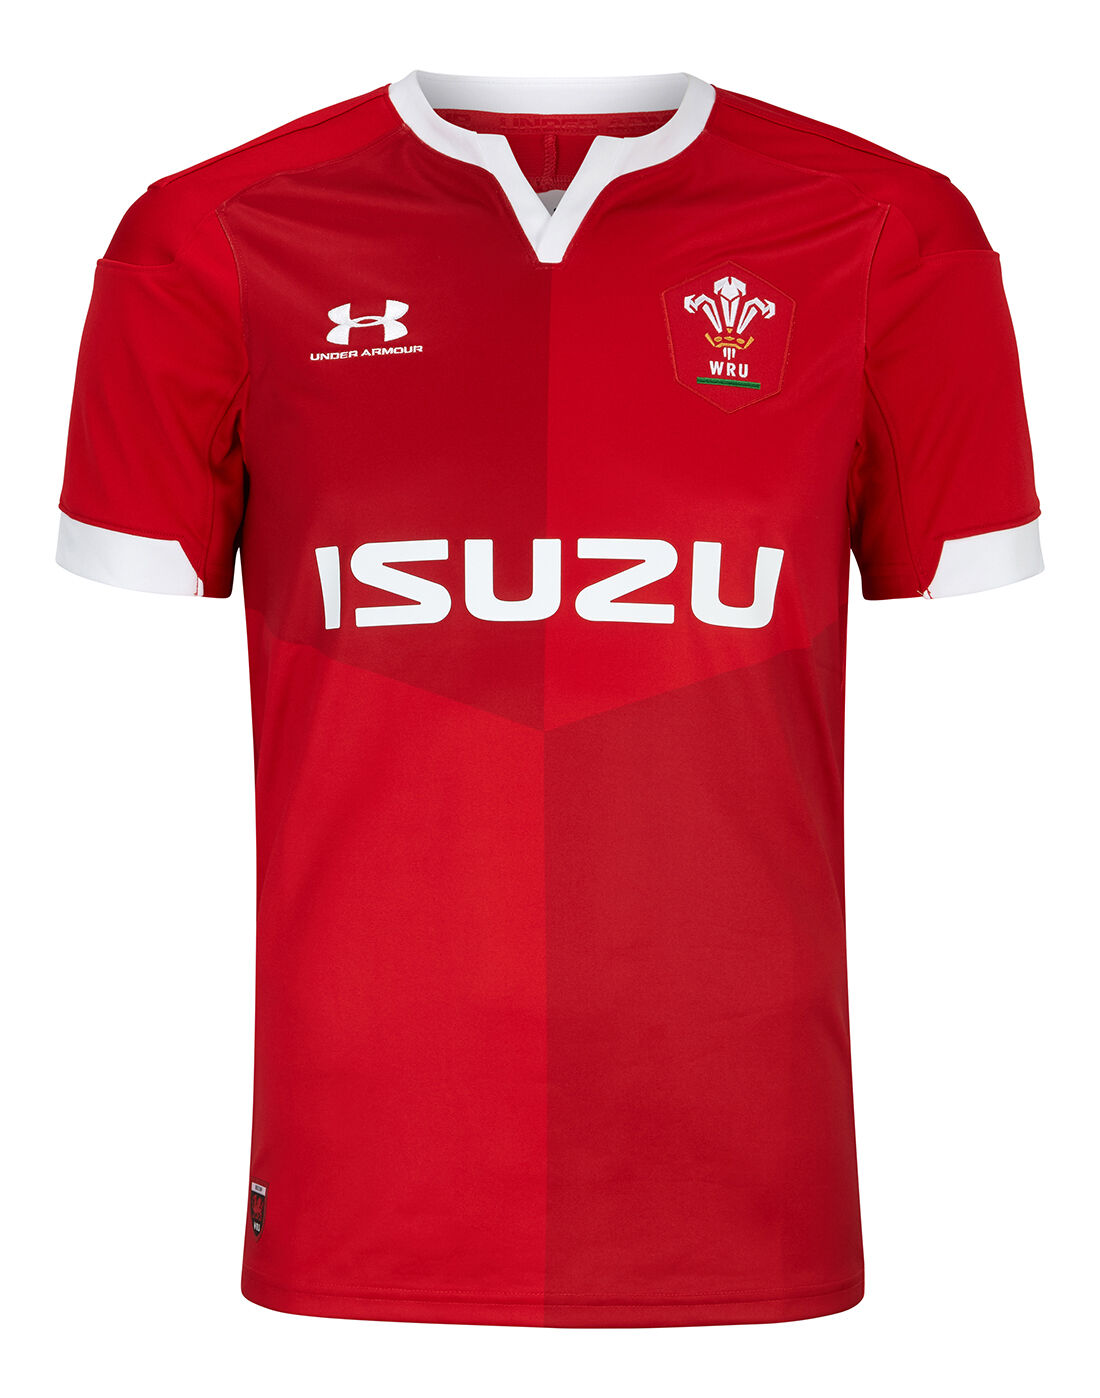 Under Armour Wales Rugby Training Singlet 2019-2020 Red 